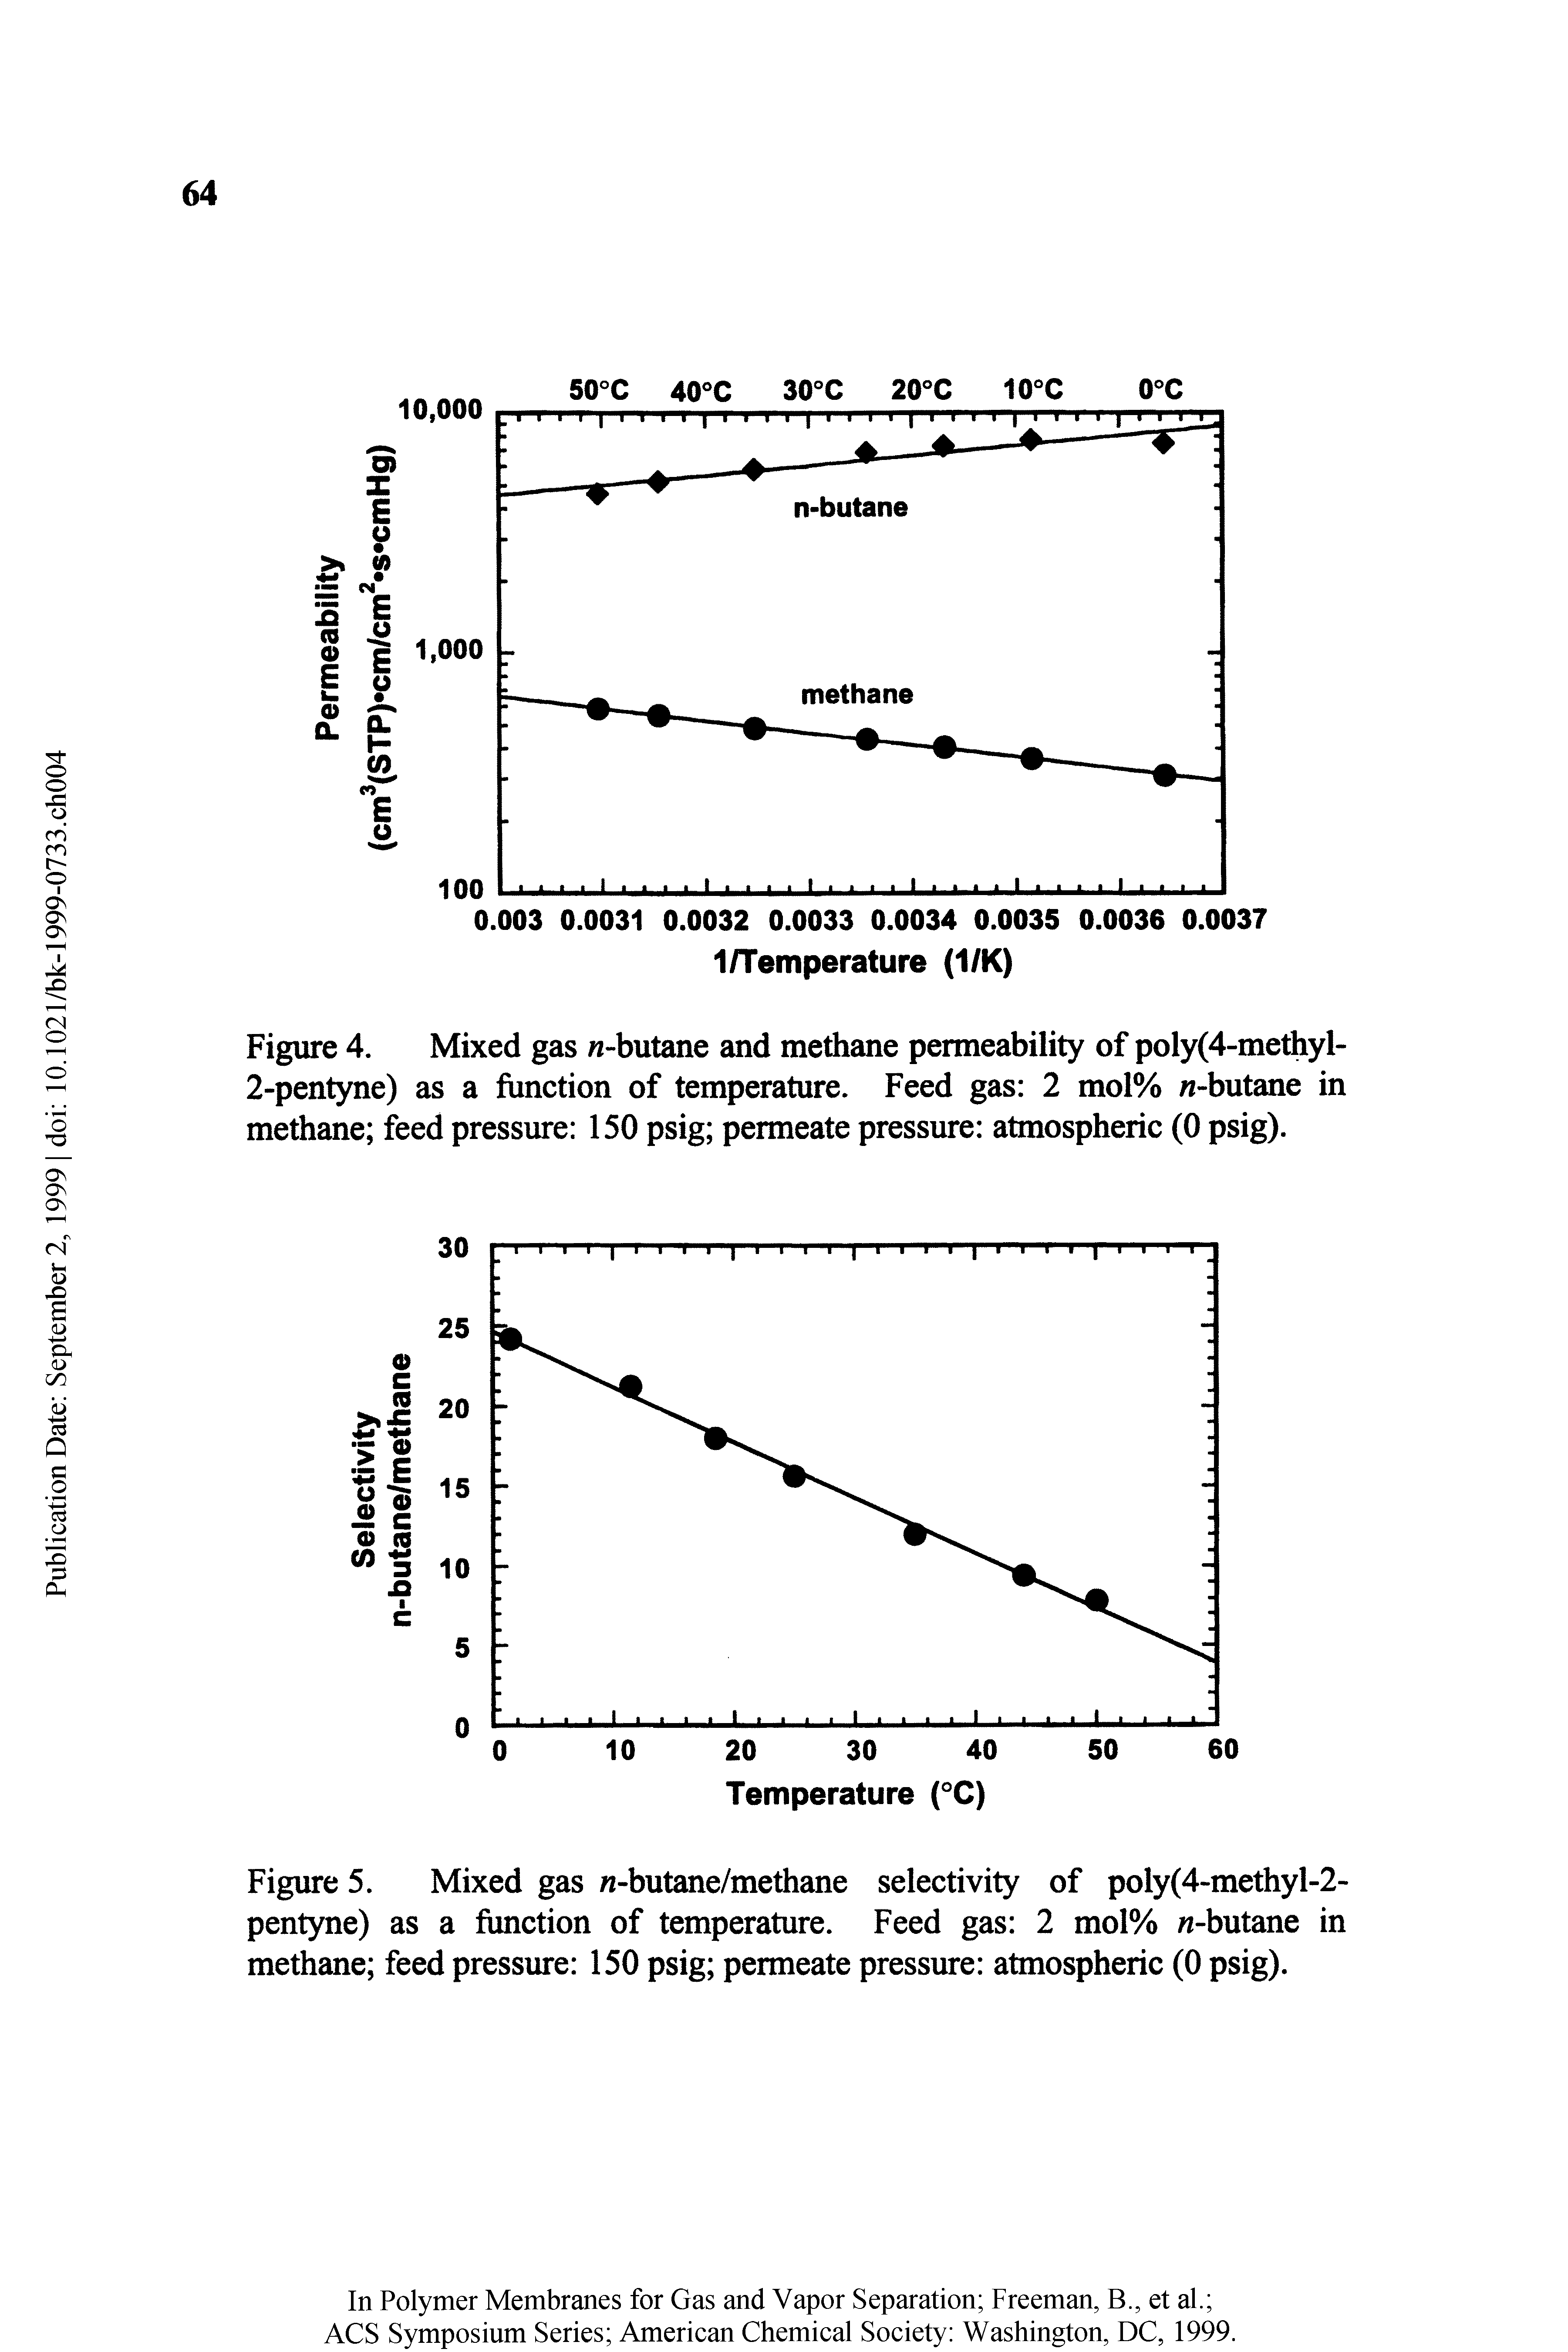 Figure 4. Mixed gas -butane and methane permeability of poly(4-methyl-2-pentyne) as a function of temperature. Feed gas 2 mol% w-butane in methane feed pressure 150 psig permeate pressure atmospheric (0 psig).